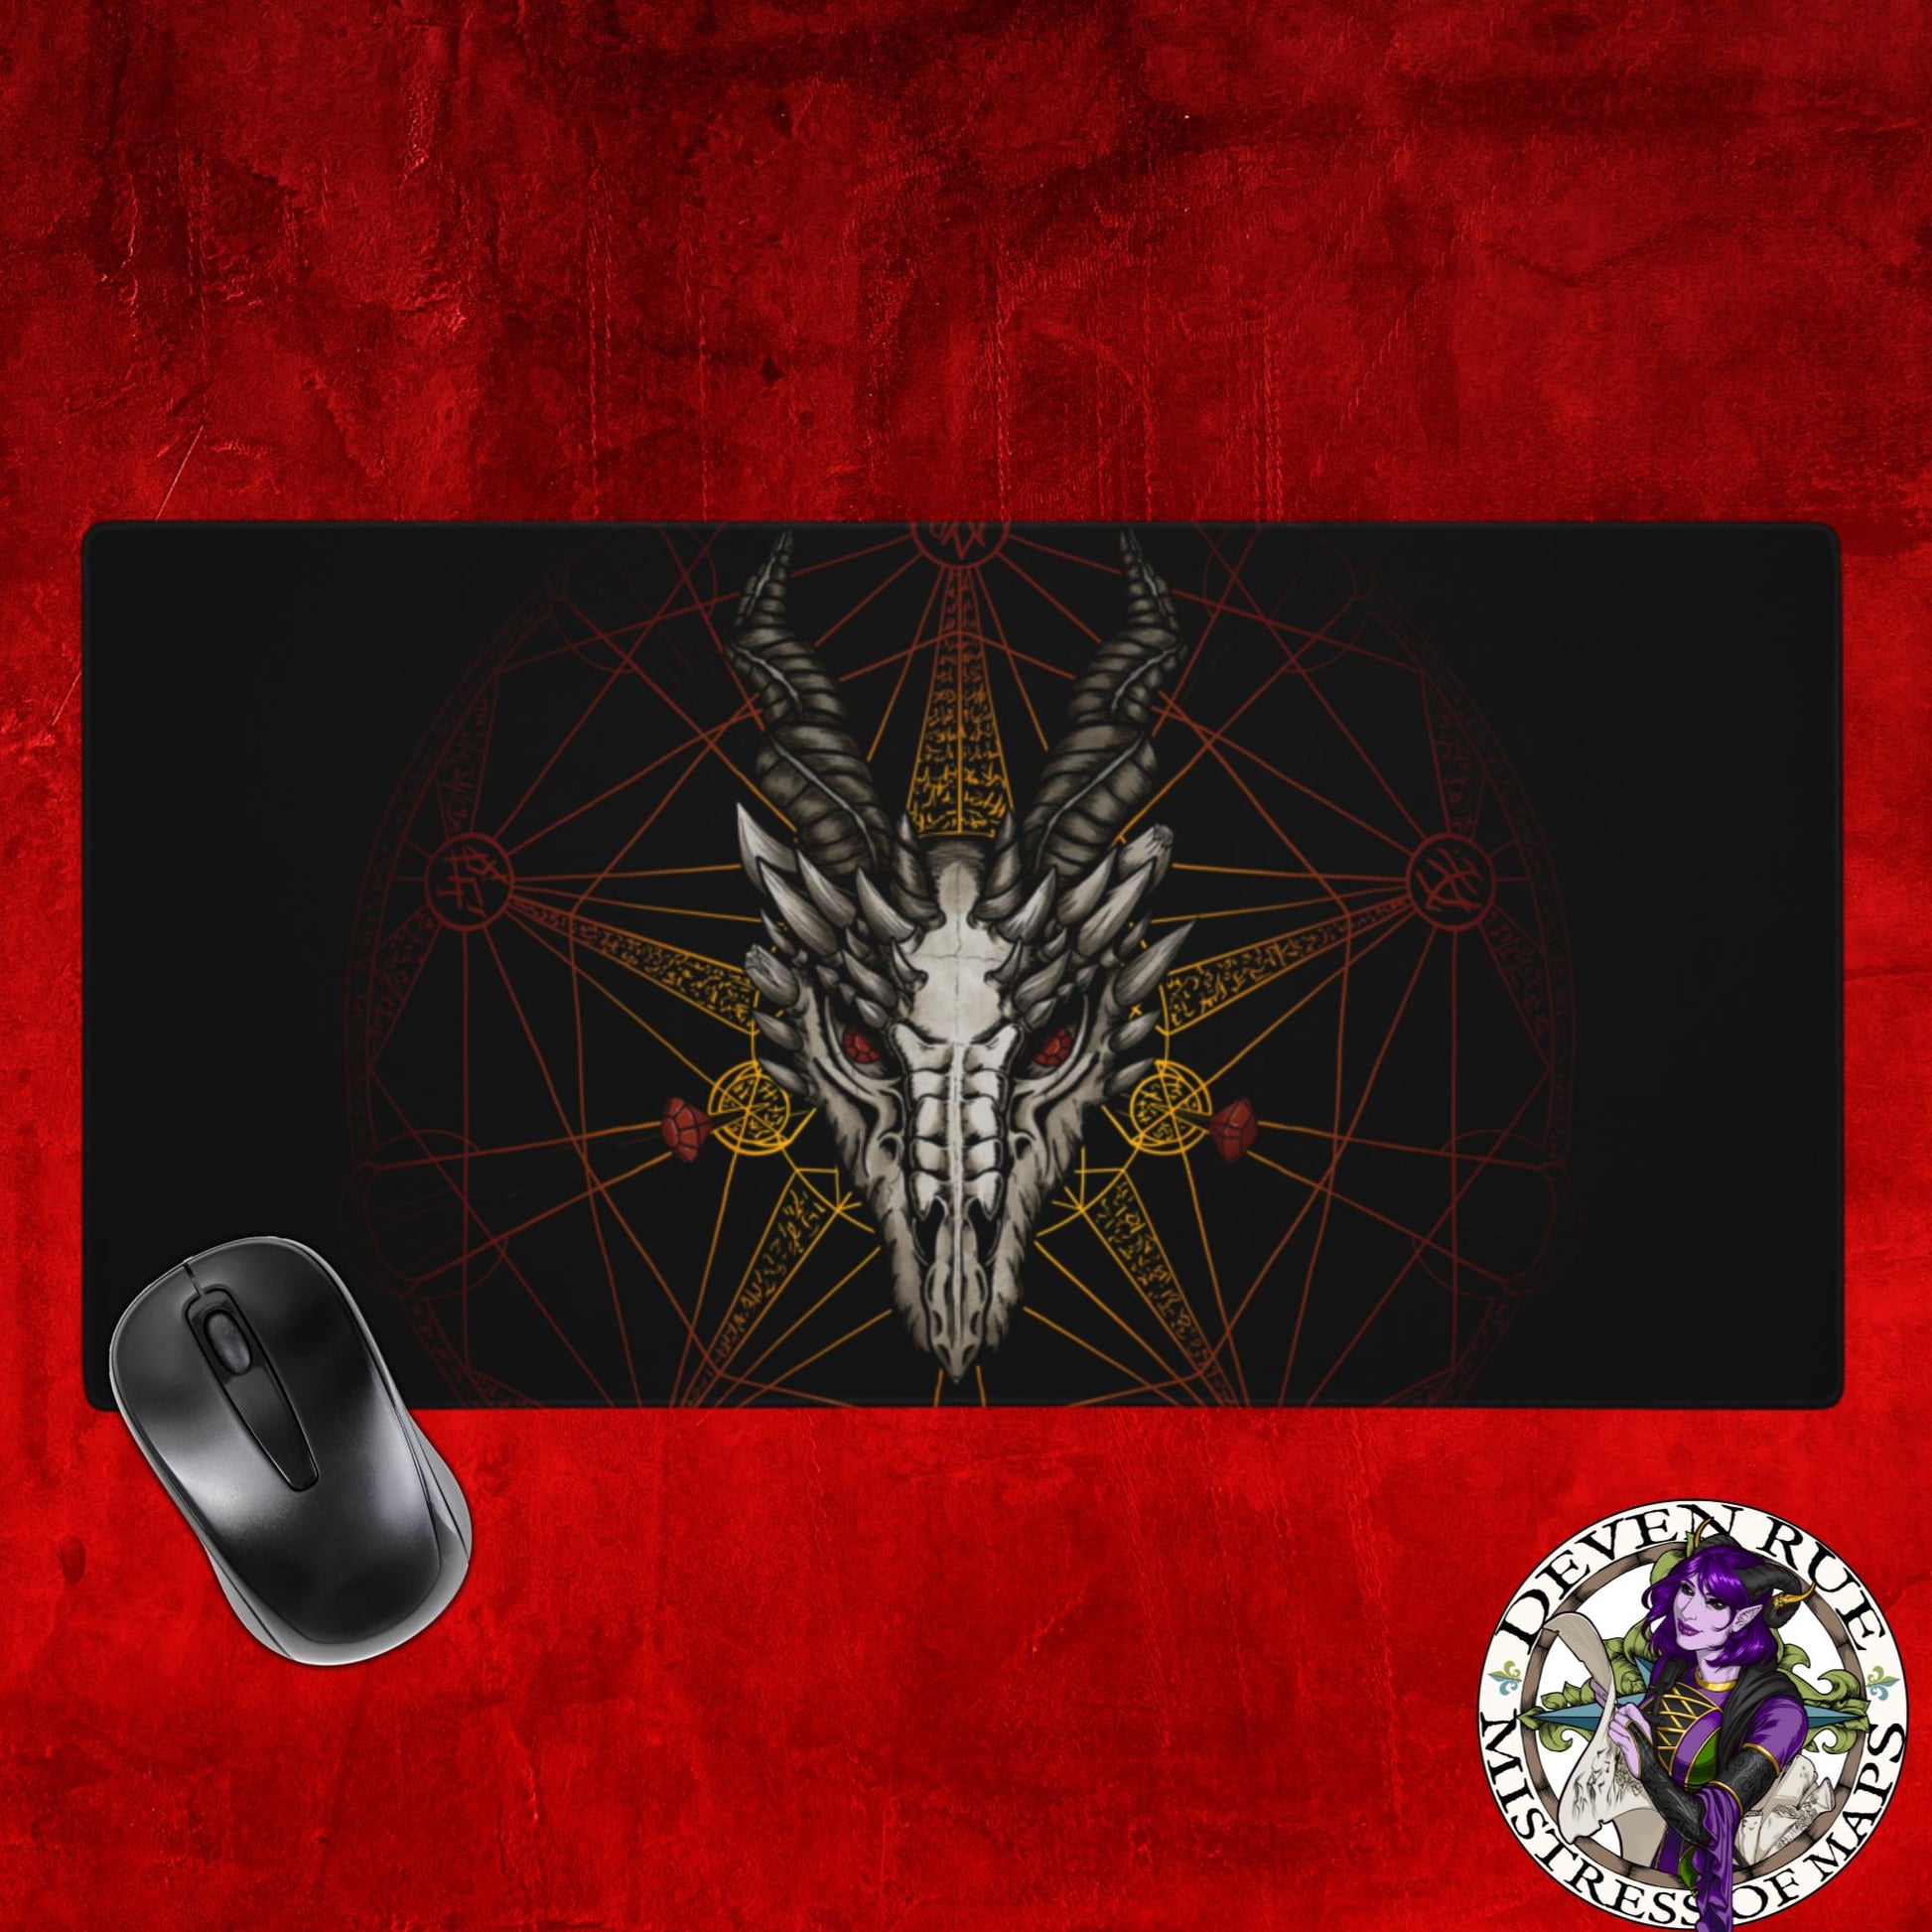 A large gaming mouse pad has the Red Dragon Summoning Circle on it, fading in from the darkness around it.